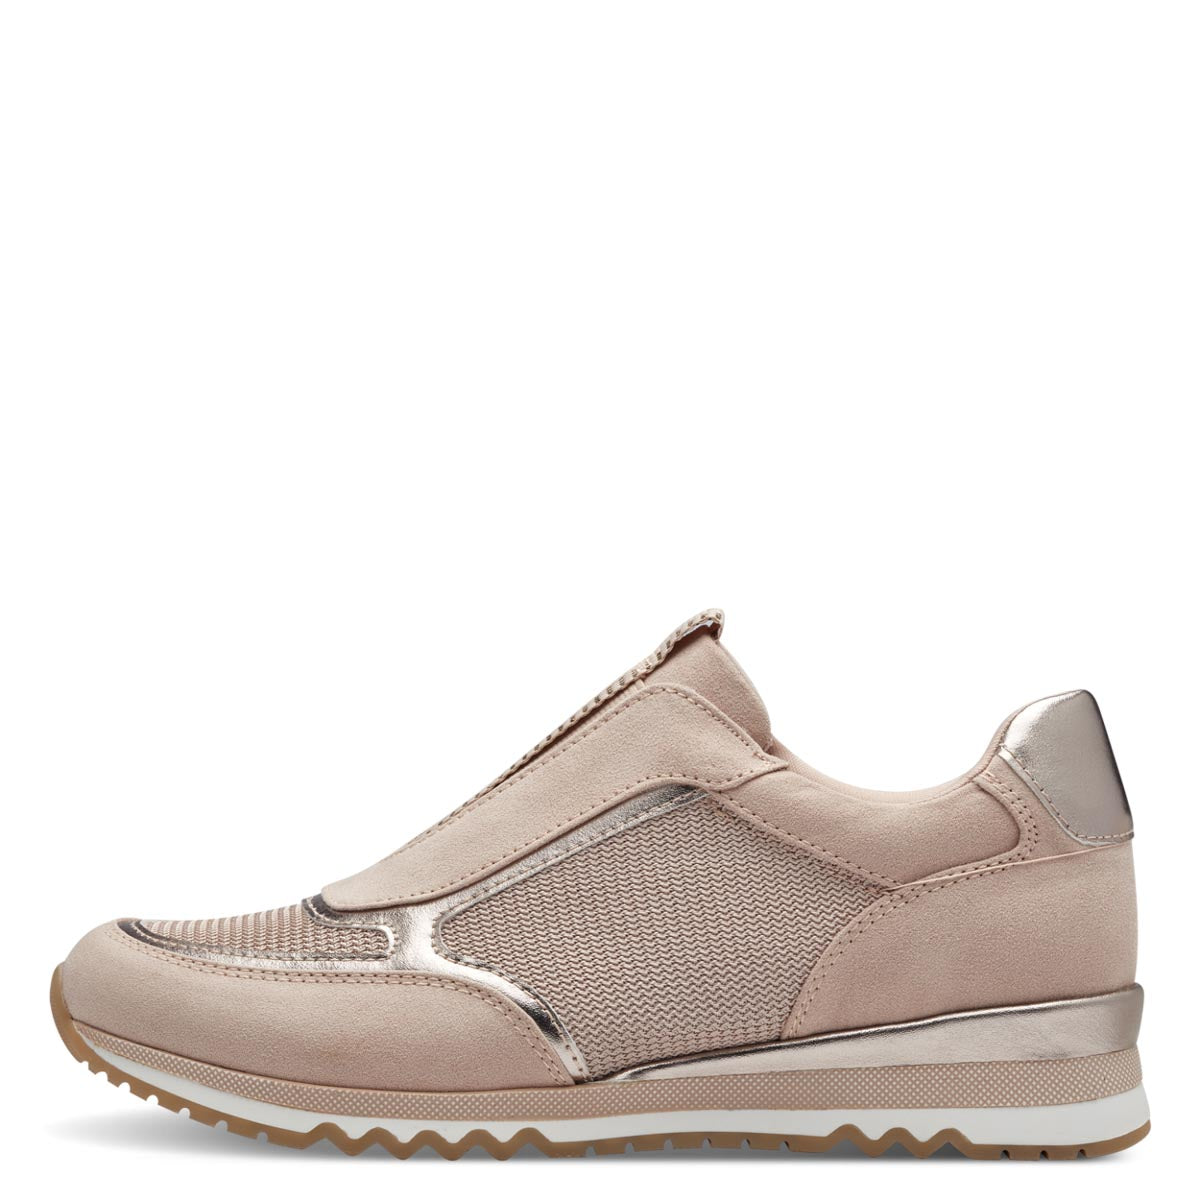 Marco Tozzi Dusty Pink Runner with Rose Gold Details and Wedge Sole